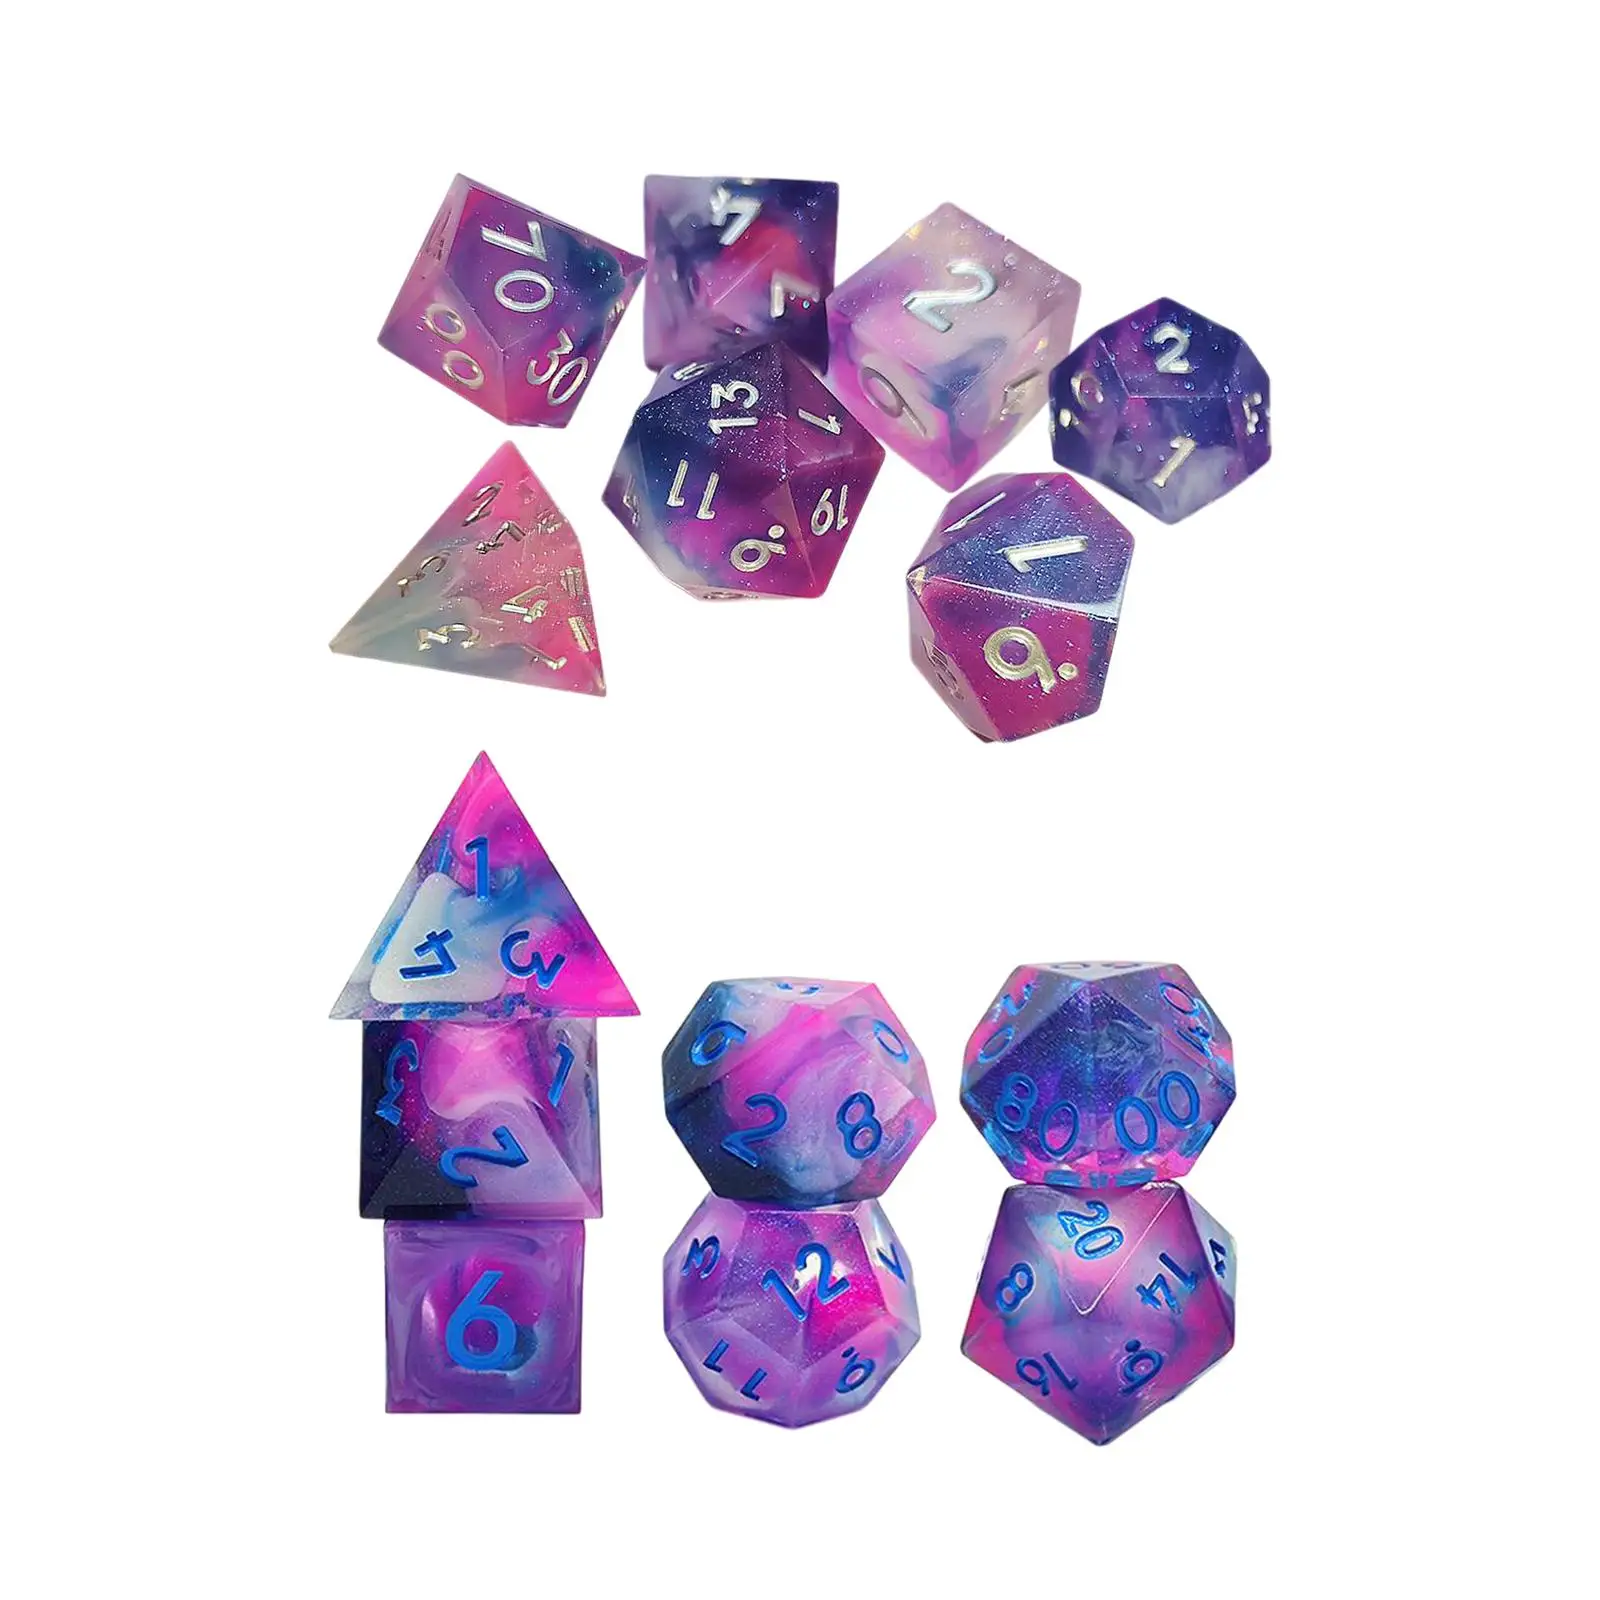 7x Resin Polyhedral Dices Resistant Quicksand Interactive Toys Rolling Dices for Camping Board Game Props Number Games